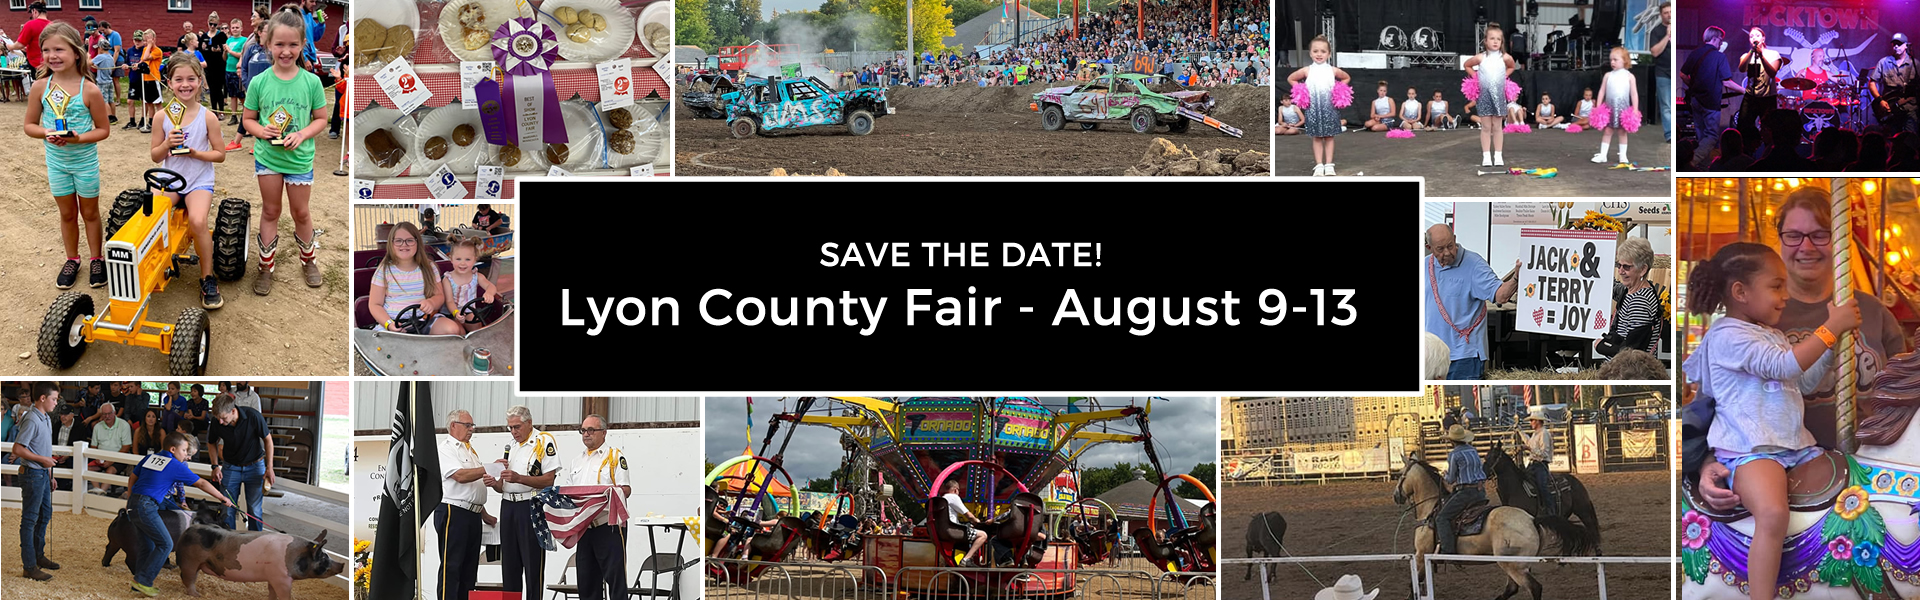 Save the Date: Lyon County Fair will be held on August 9 through 13.